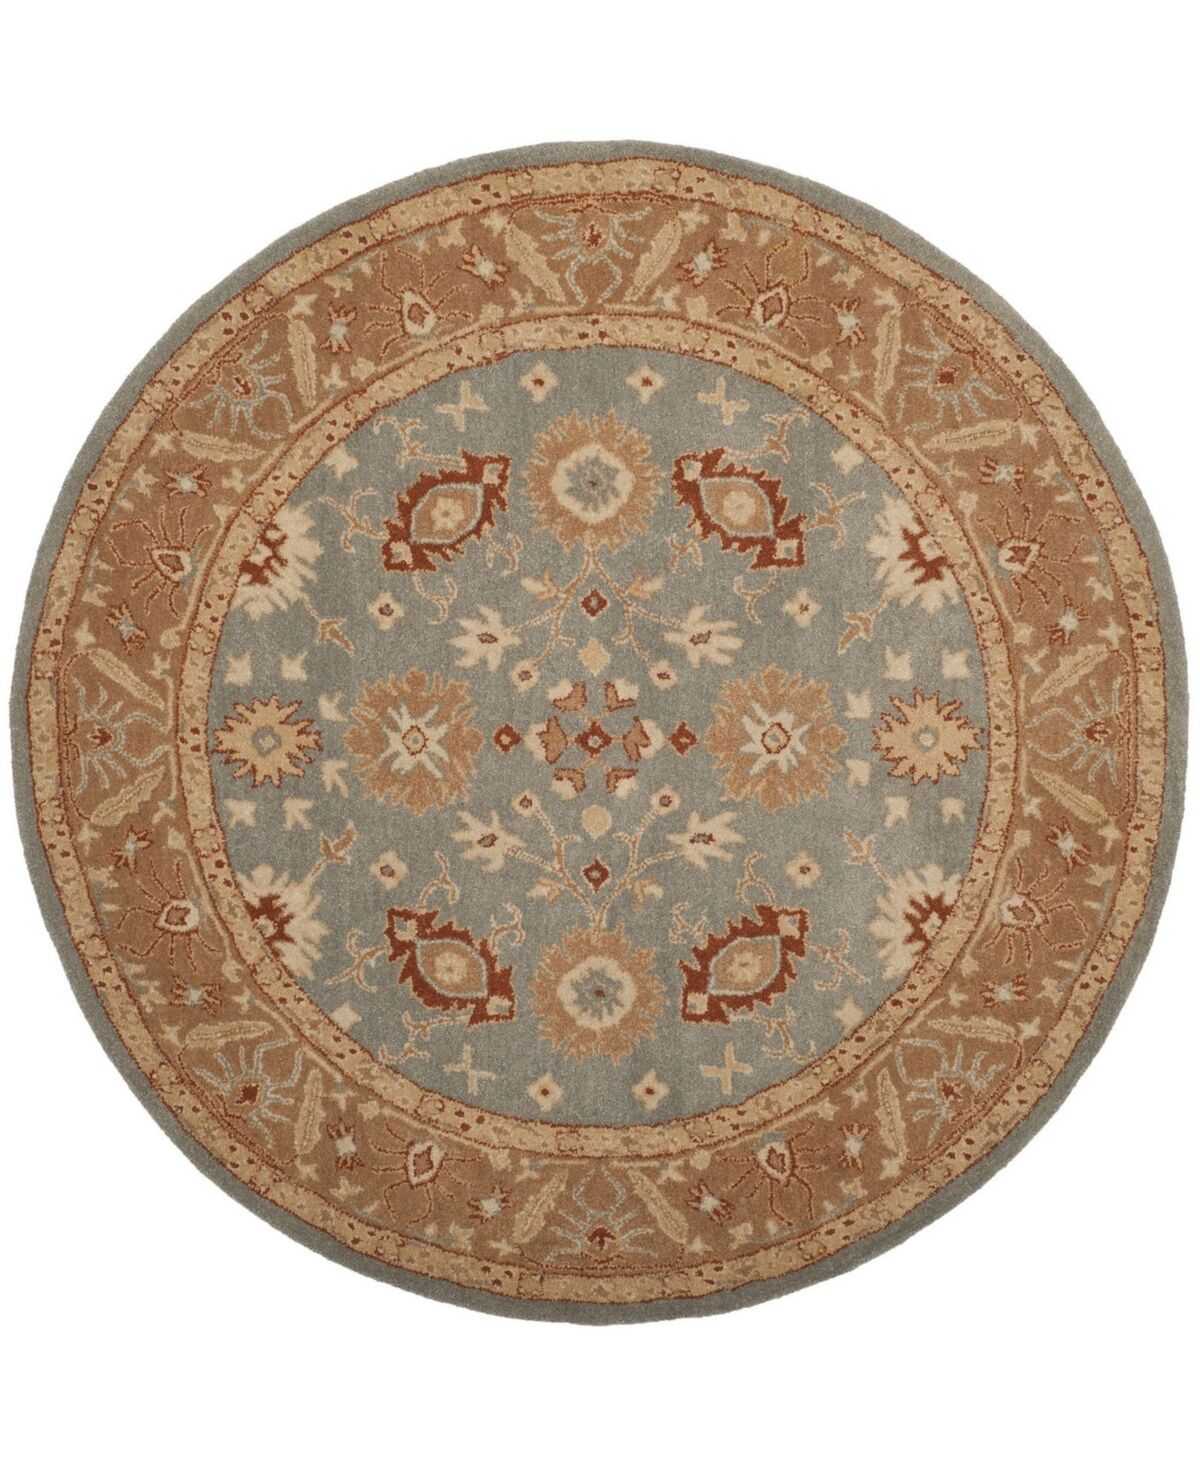 Safavieh Antiquity At61 Blue and Beige 6' x 6' Round Area Rug - Blue